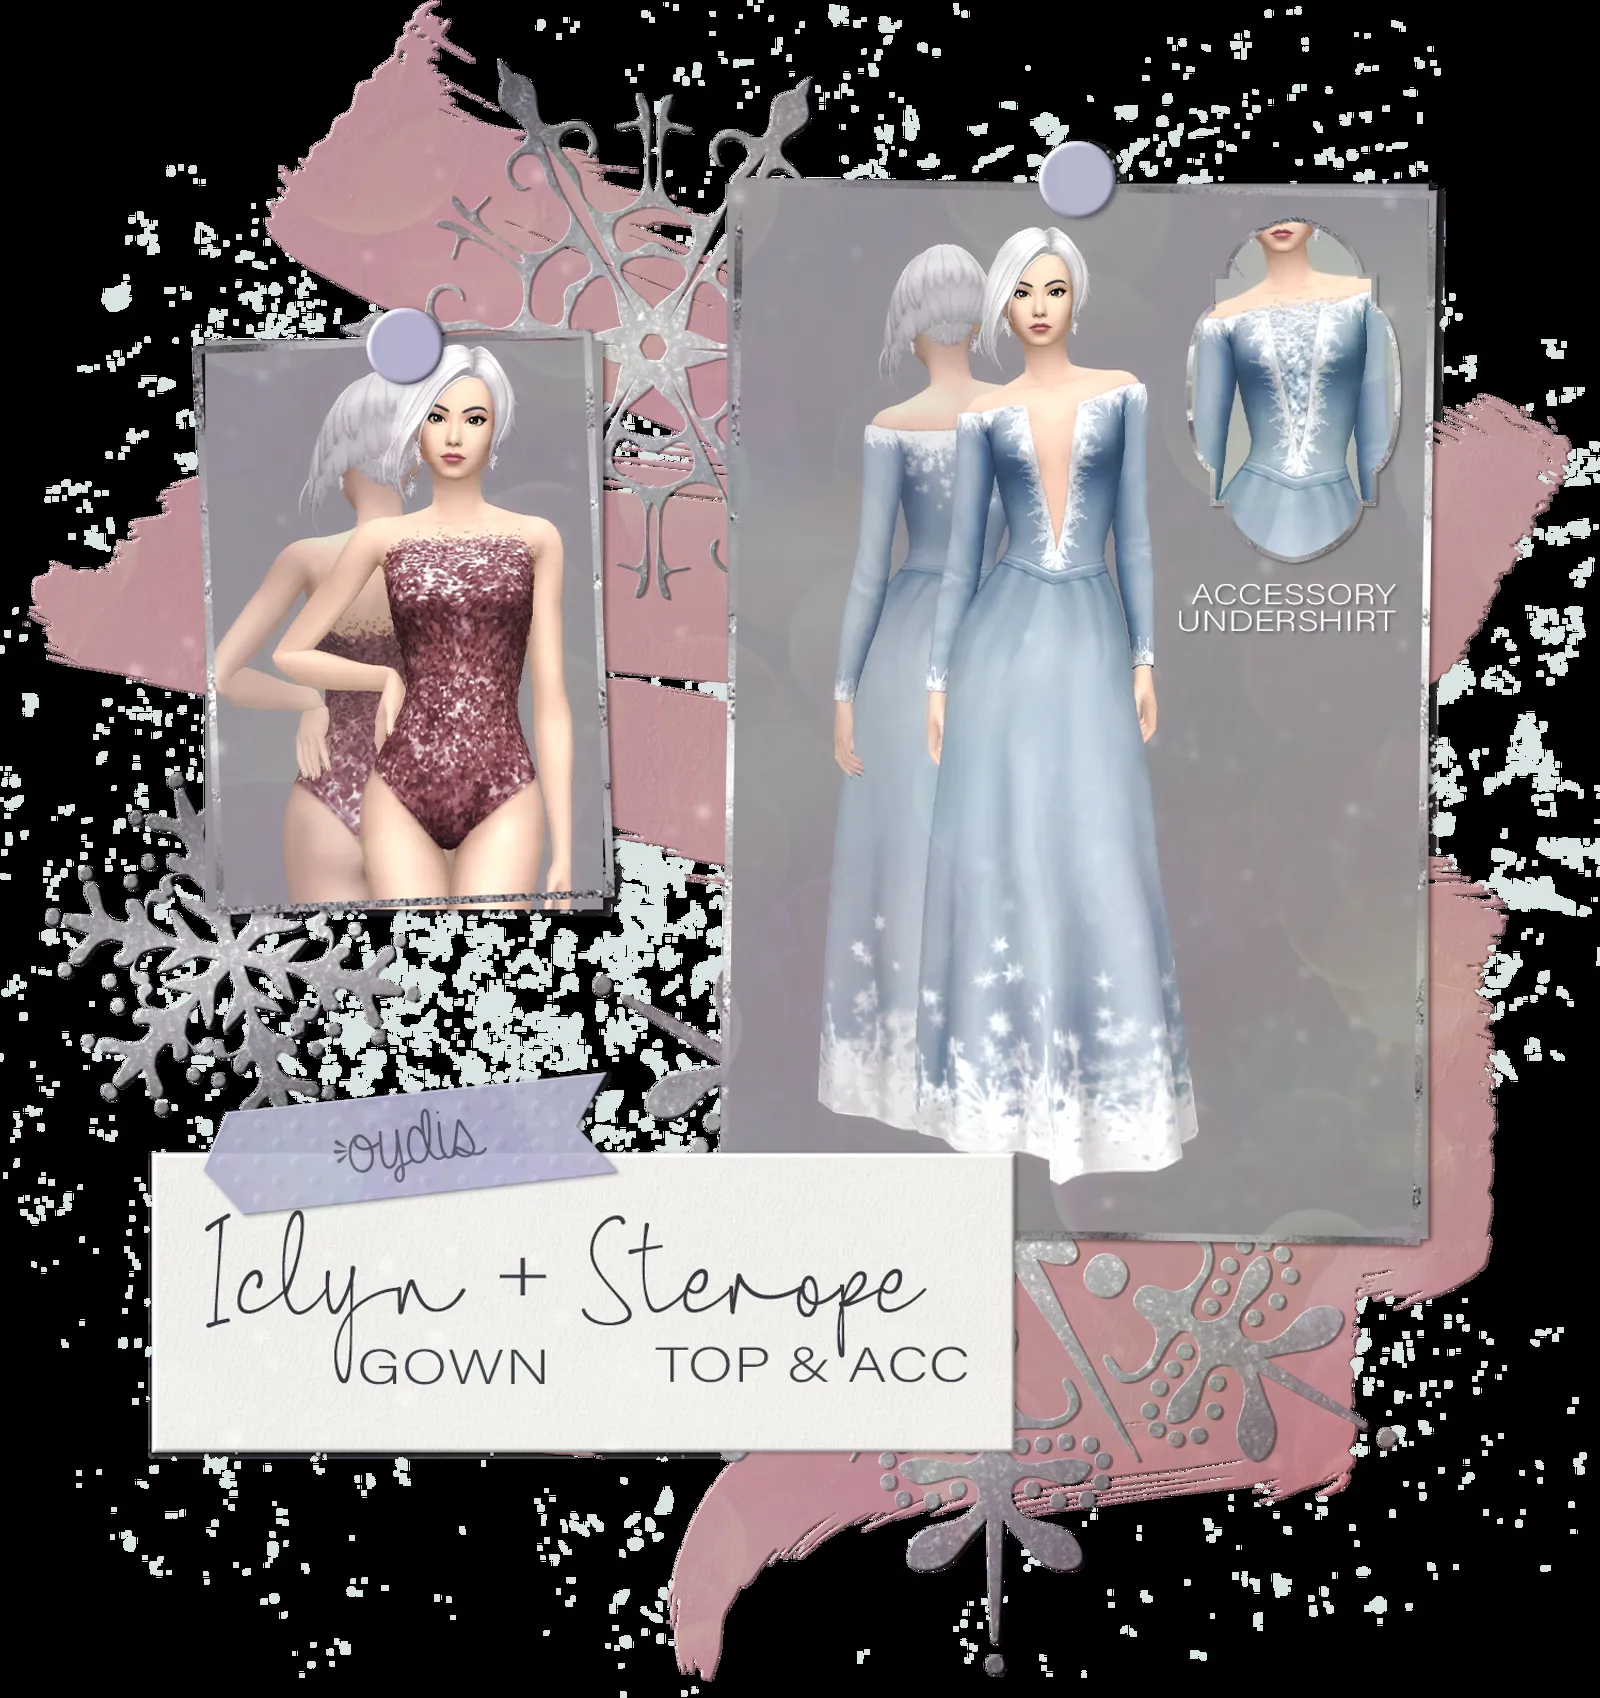 Iclyn Gown + Sterope Top & Accessory